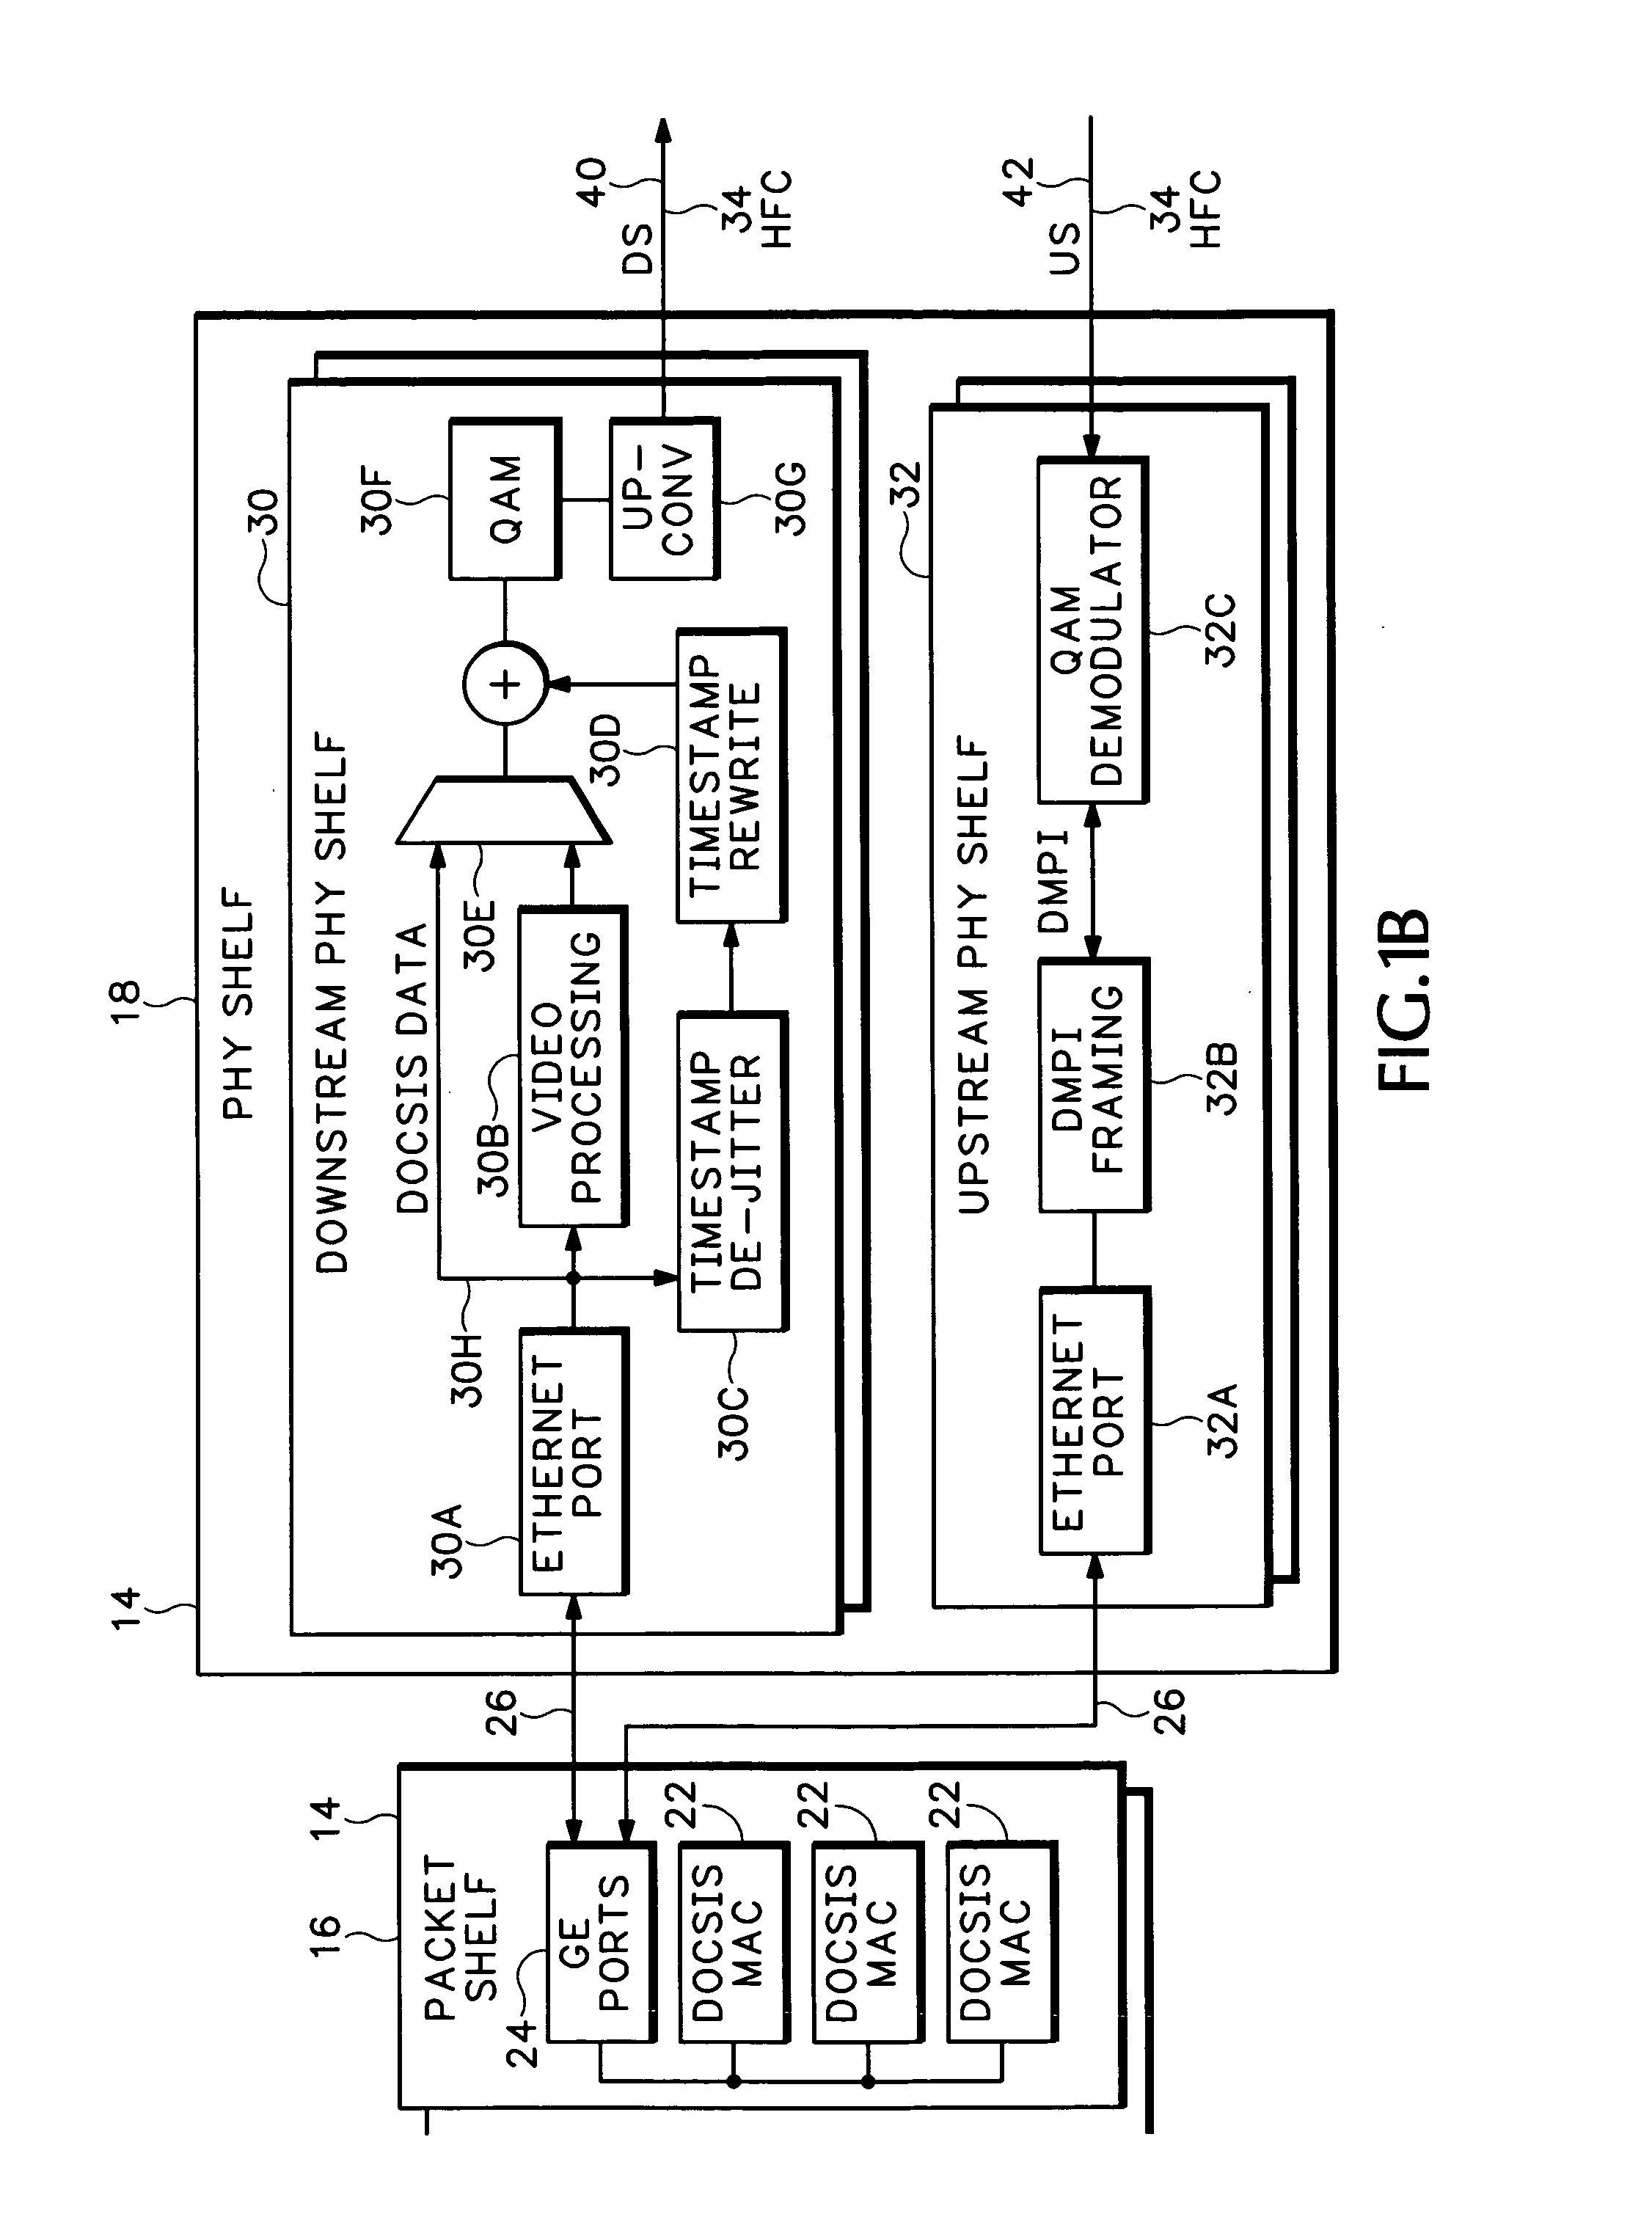 Upstream physical interface for modular cable modem termination system